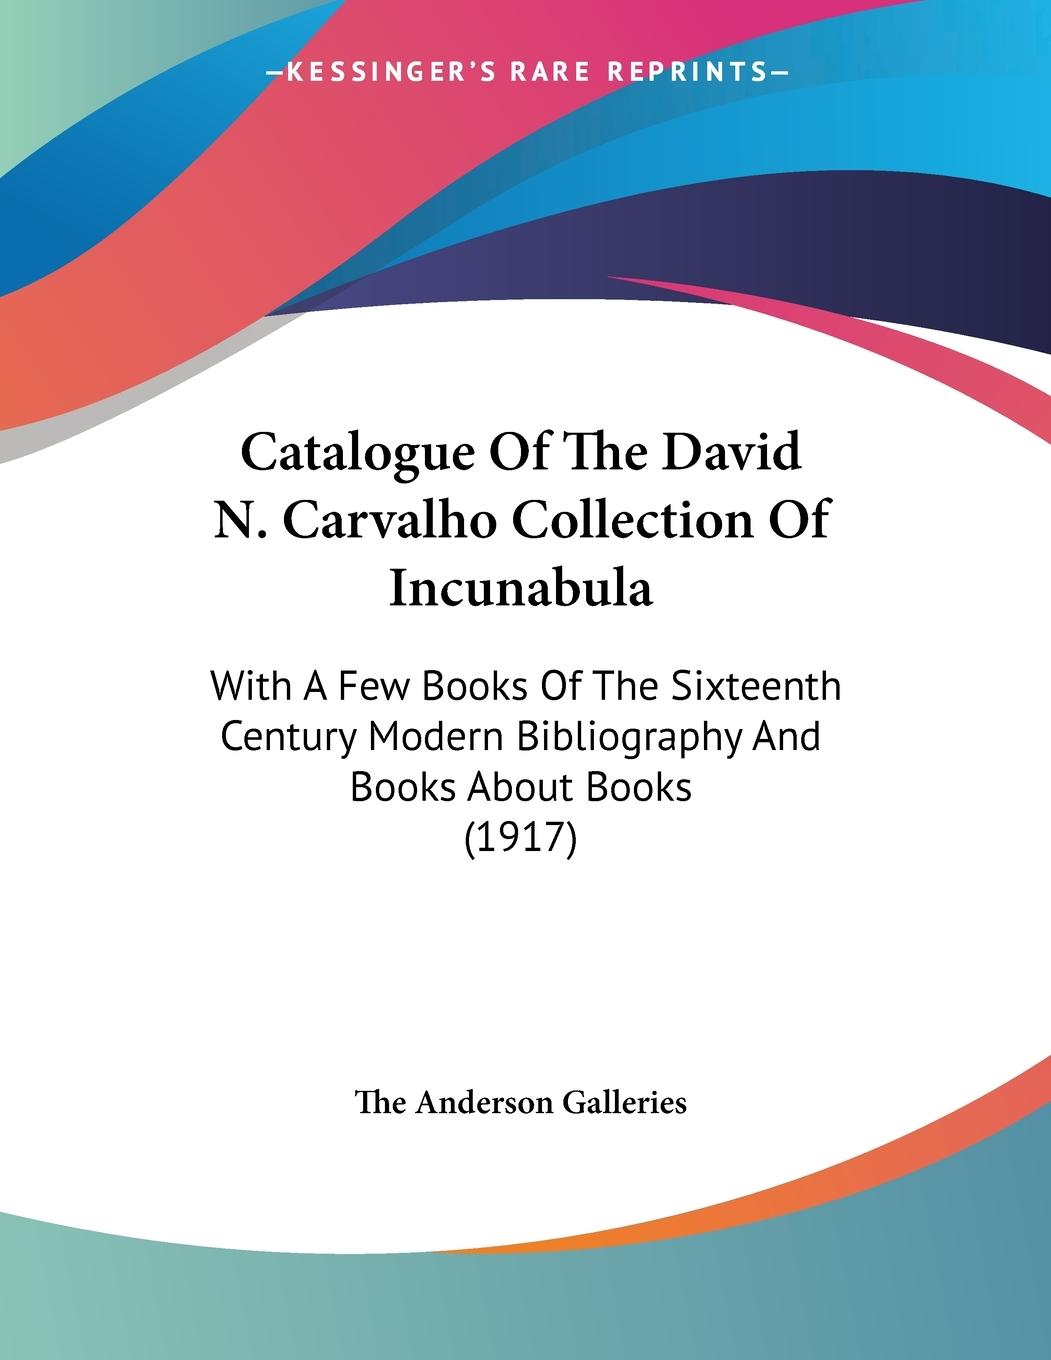 Catalogue Of The David N. Carvalho Collection Of Incunabula - The Anderson Galleries